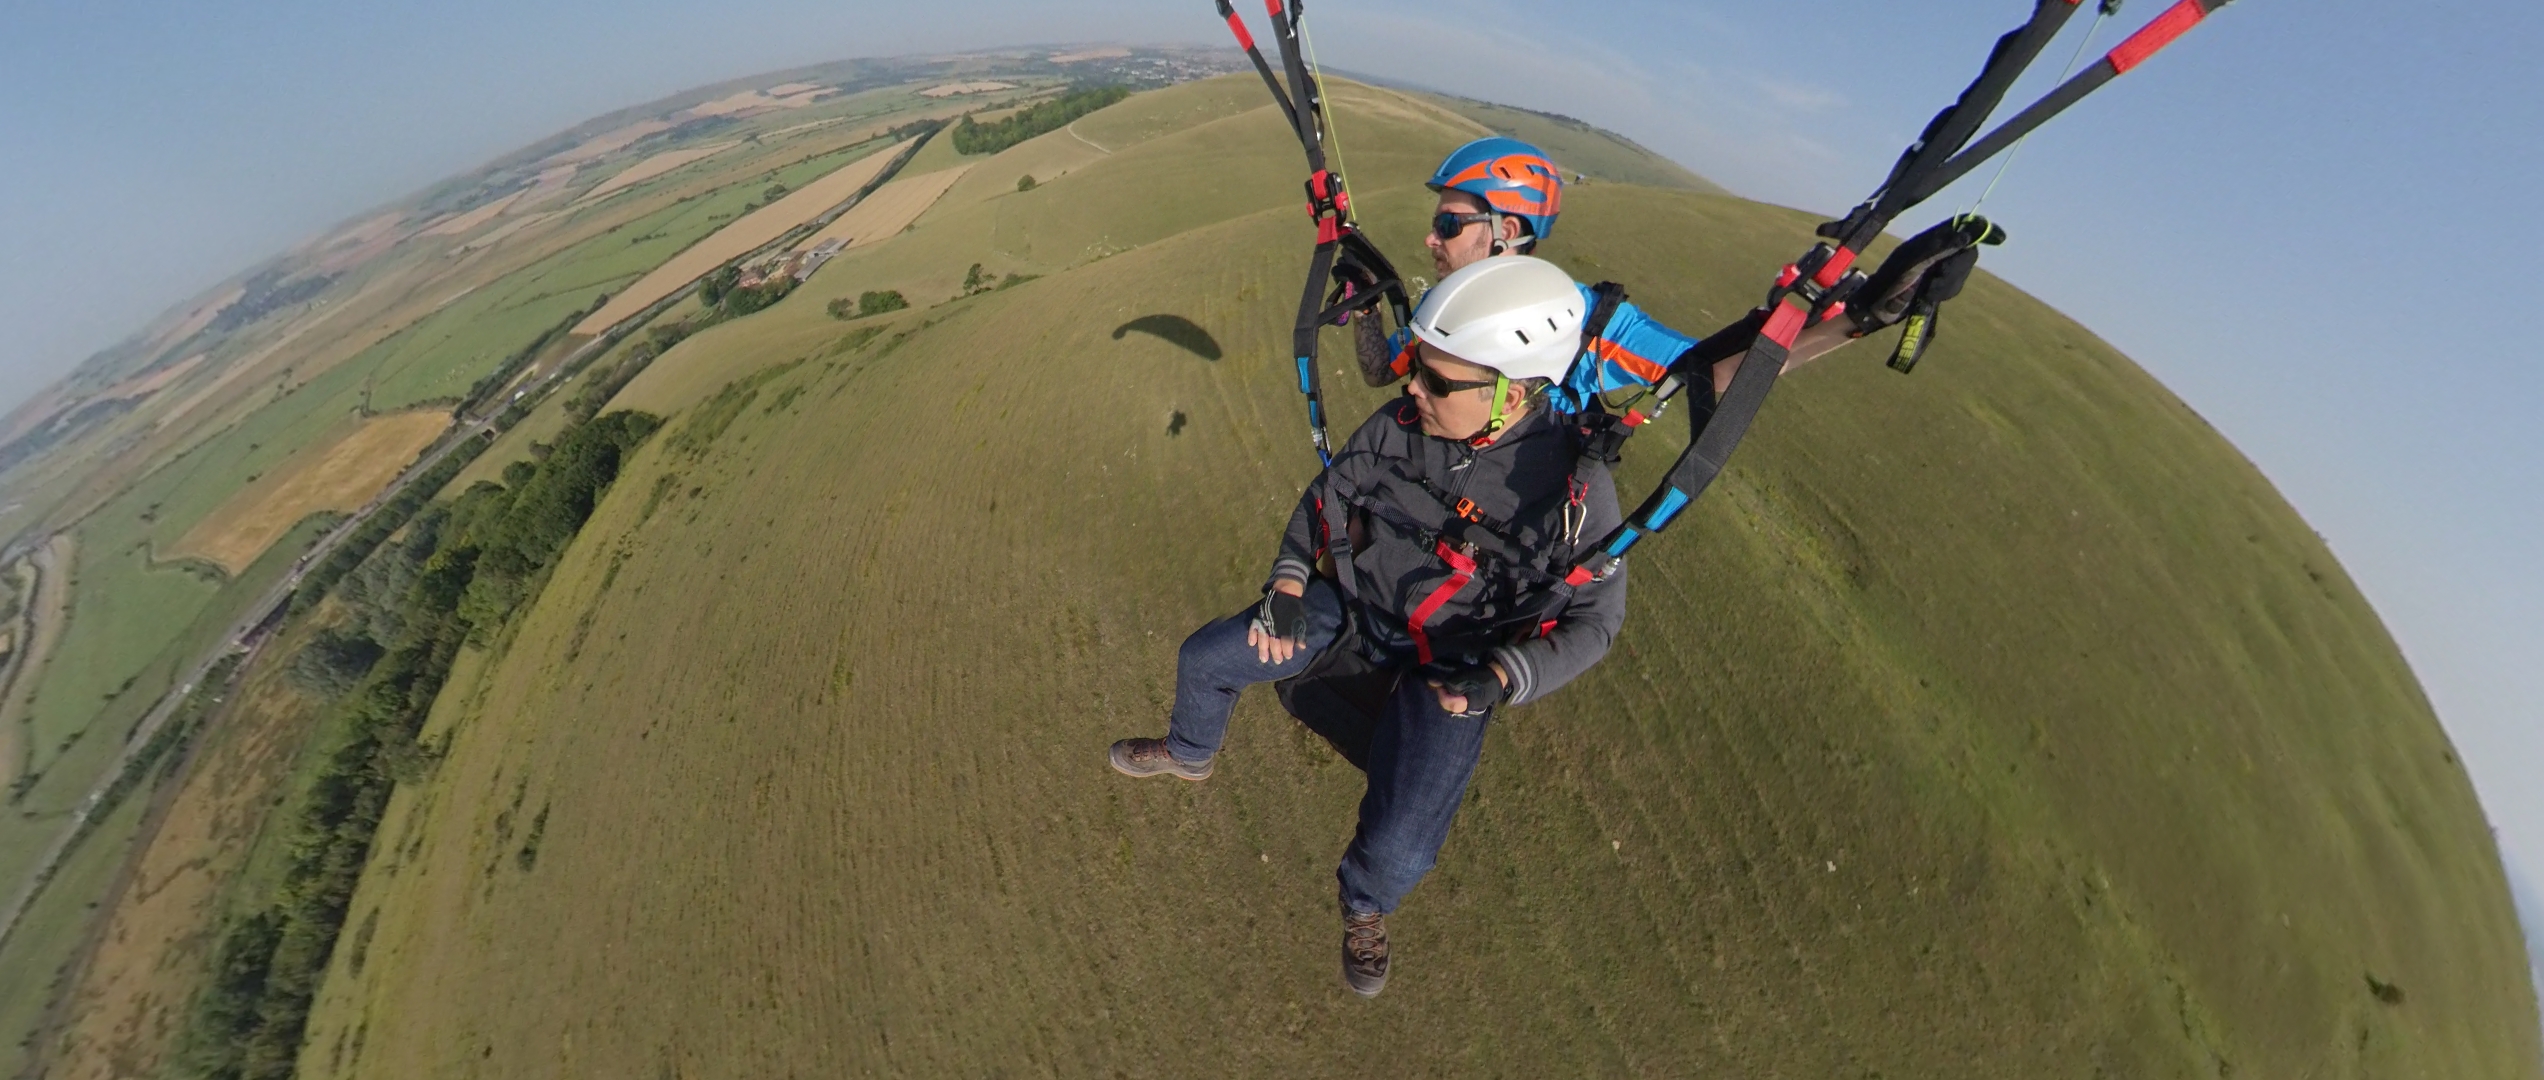 Tandem paragliding experience in Sussex South England